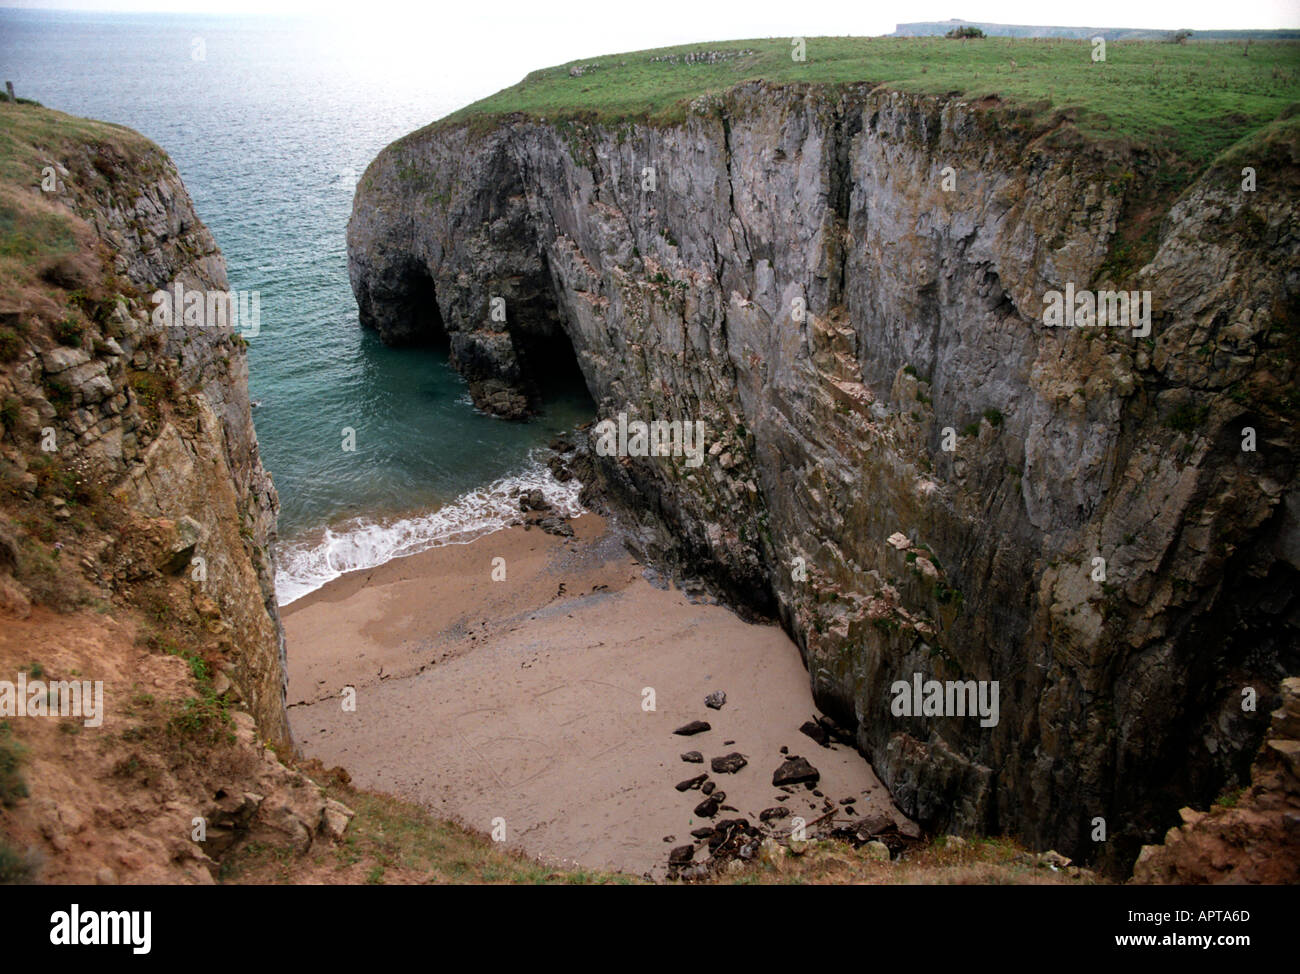 Elegug stacks and arches in Pembrokeshire Wales Stock Photo